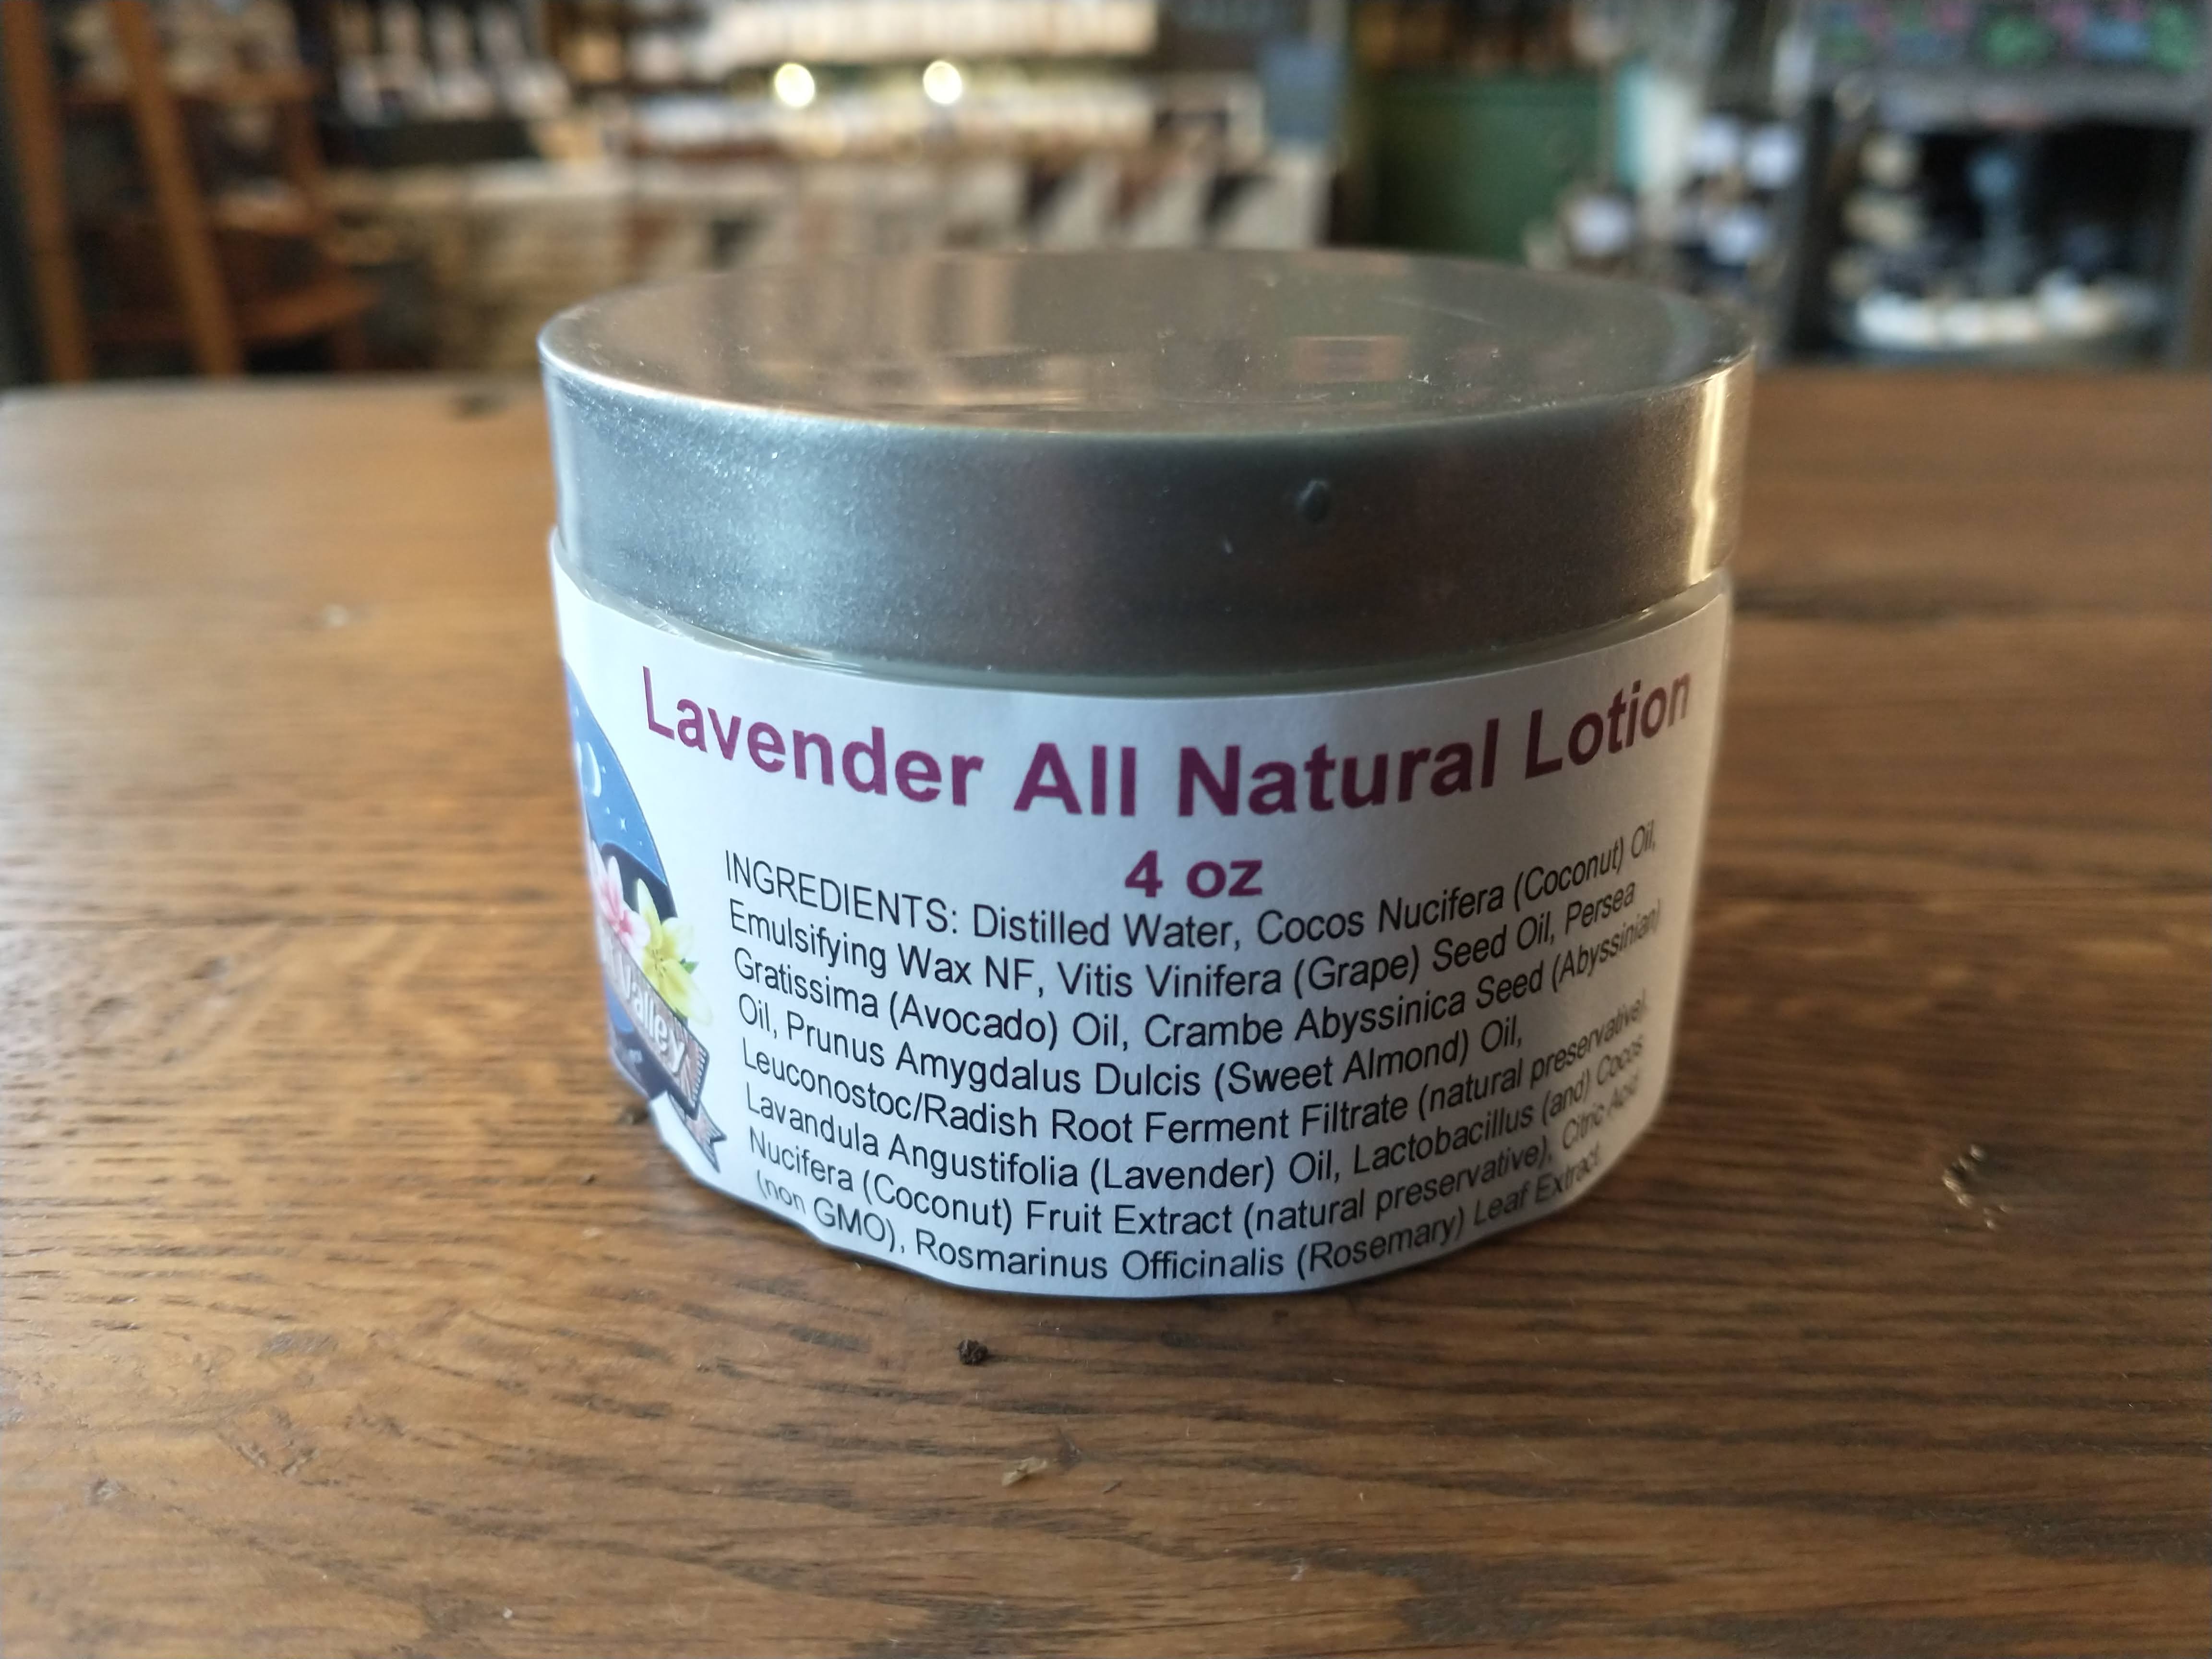 Lavender All Natural Lotion